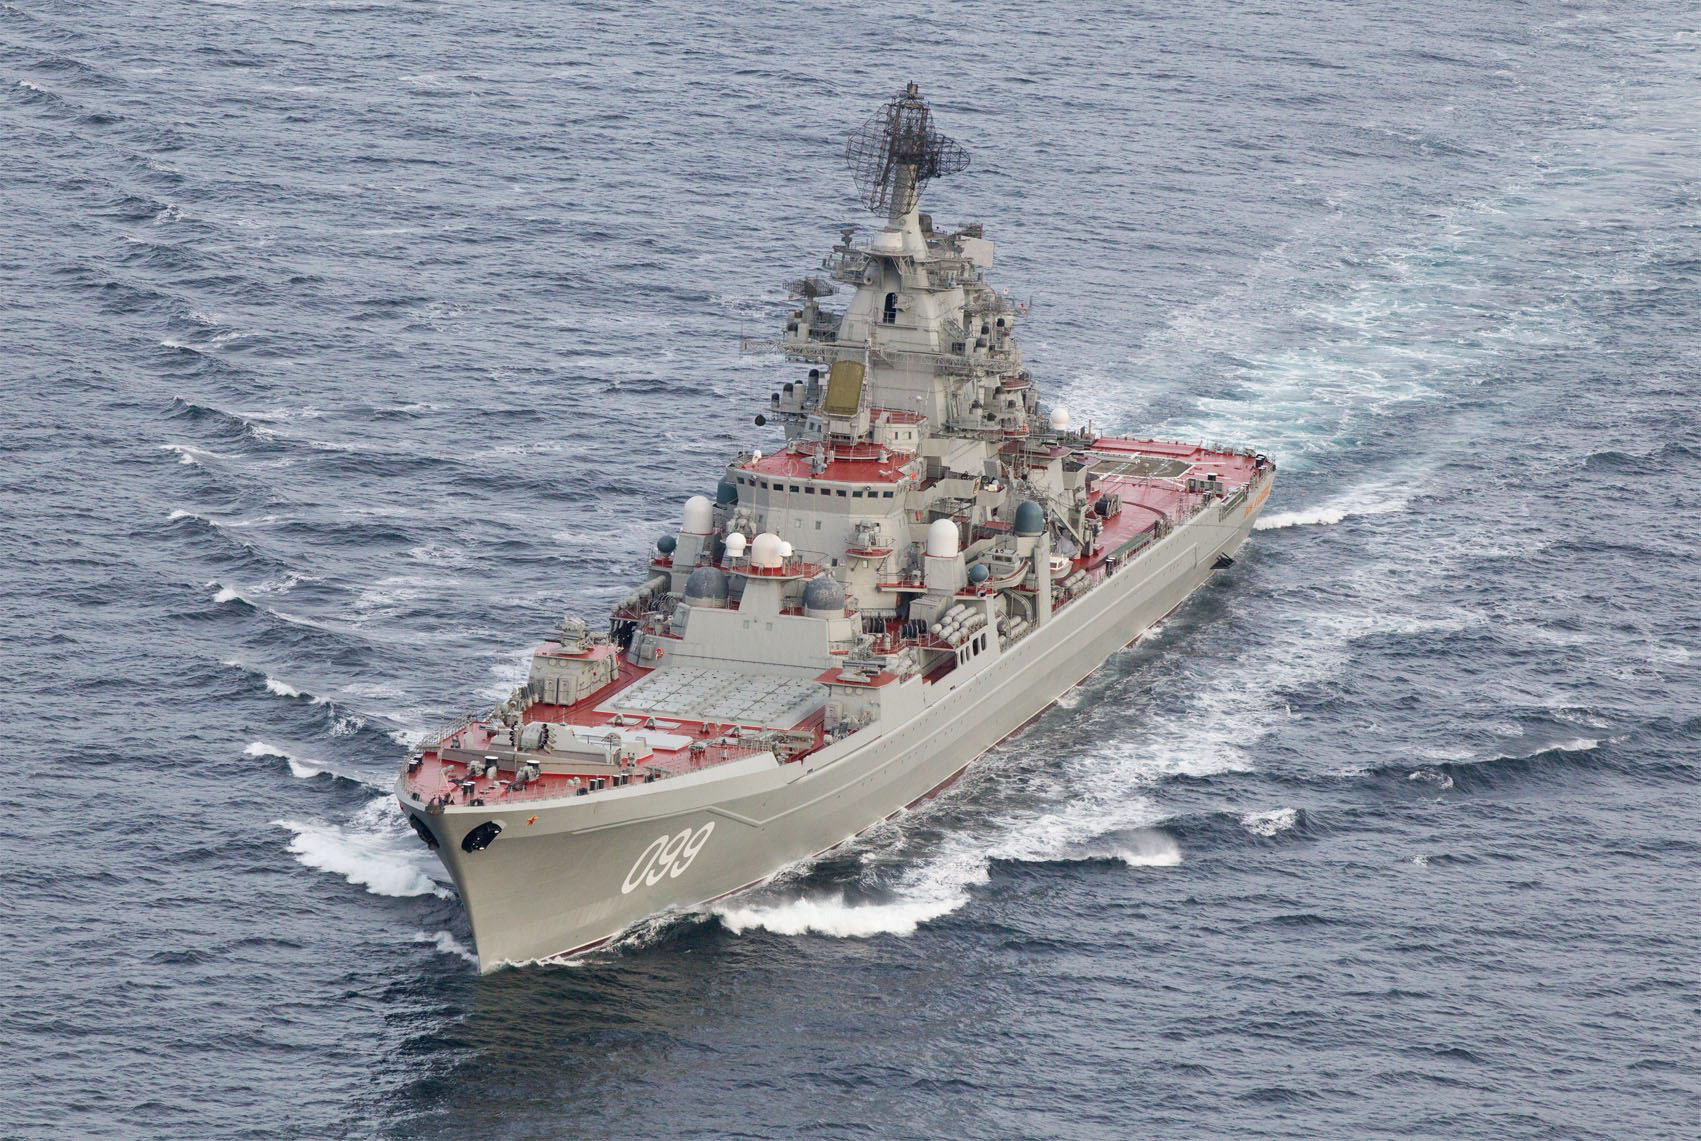 Why Putin is unleashing his only aircraft carrier